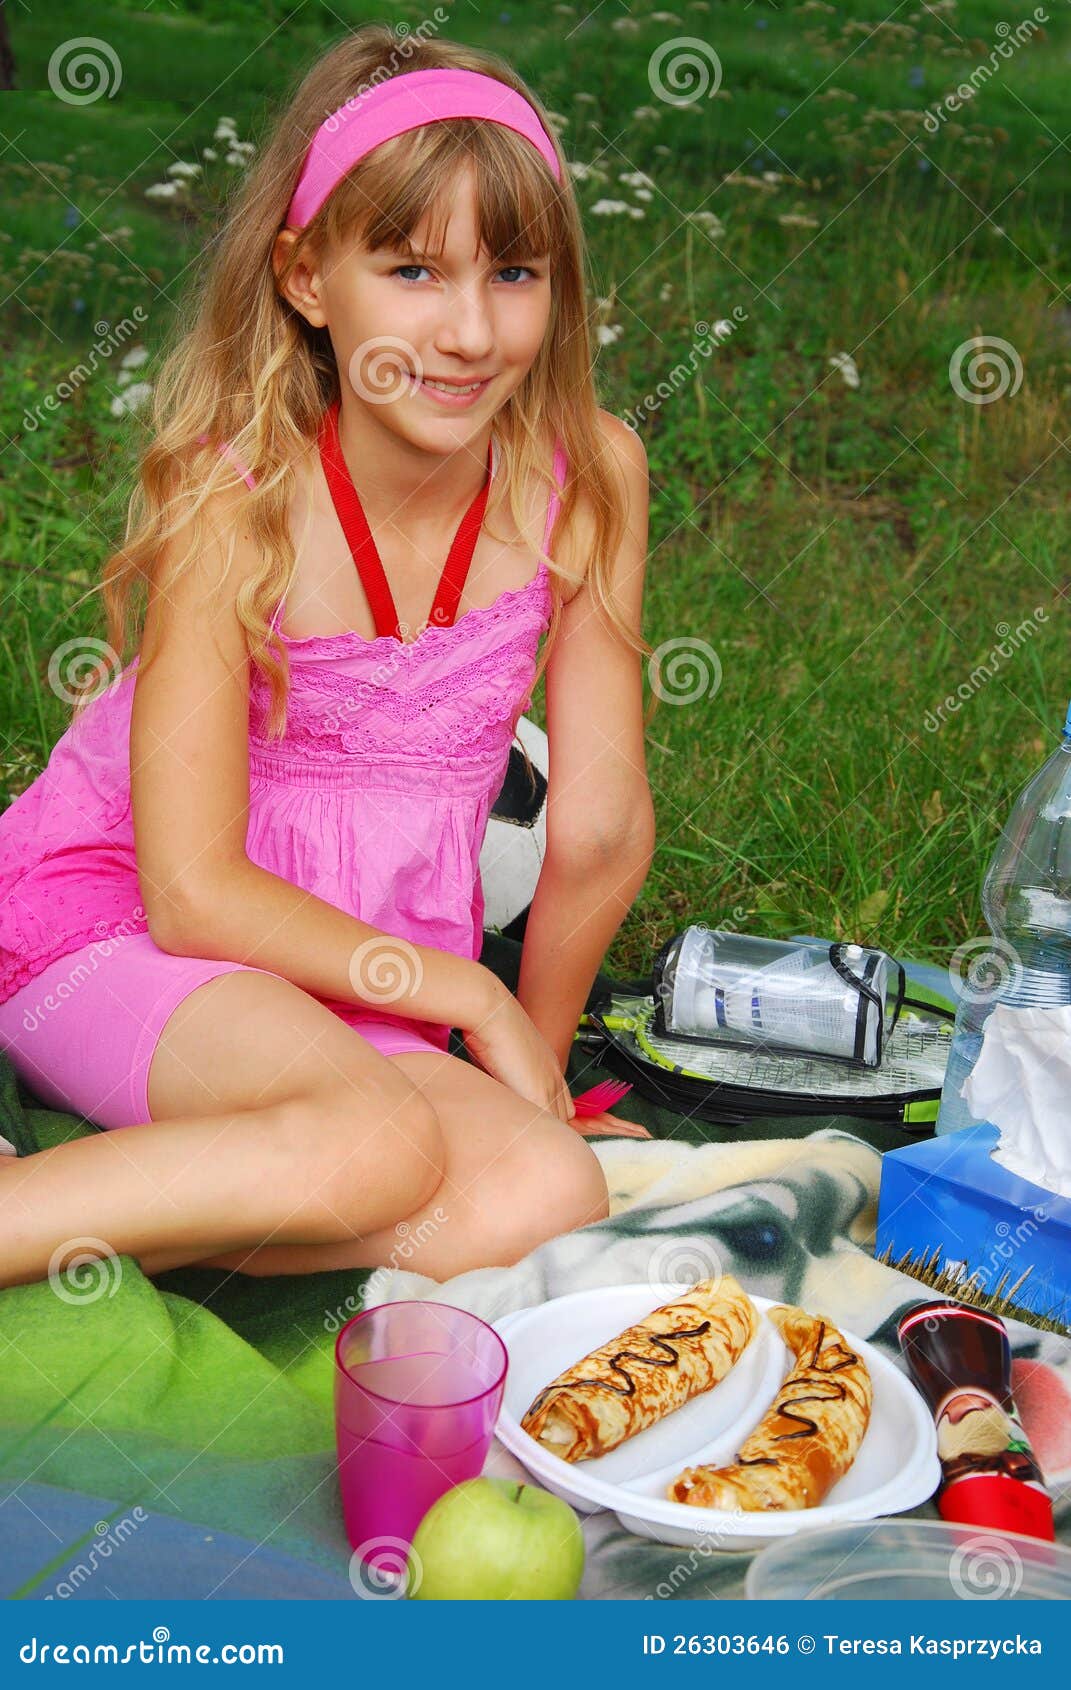 Young Girl On The Picnic Royalty Free Stock Image - Image: 26303646